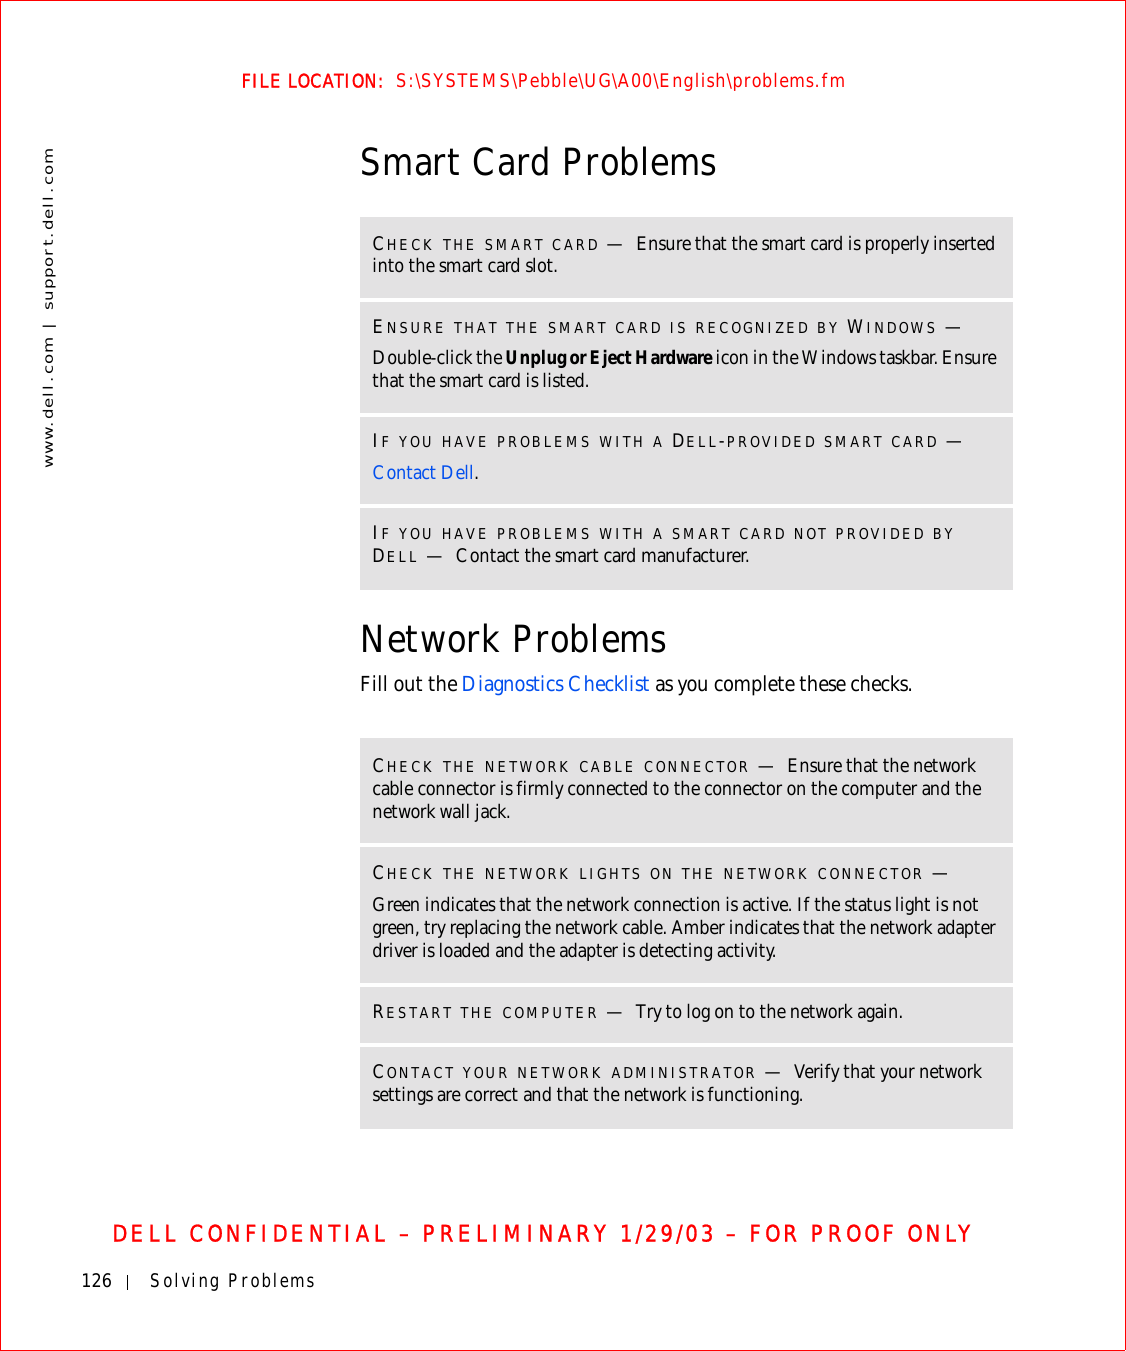 126 Solving Problemswww.dell.com | support.dell.comFILE LOCATION:  S:\SYSTEMS\Pebble\UG\A00\English\problems.fmDELL CONFIDENTIAL – PRELIMINARY 1/29/03 – FOR PROOF ONLYSmart Card ProblemsNetwork ProblemsFill out the Diagnostics Checklist as you complete these checks.CHECK THE SMART CARD —Ensure that the smart card is properly inserted into the smart card slot.ENSURE THAT THE SMART CARD IS RECOGNIZED BY WINDOWS —Double-click the Unplug or Eject Hardware icon in the Windows taskbar. Ensure that the smart card is listed.IF YOU HAVE PROBLEMS WITH A DELL-PROVIDED SMART CARD —Contact Dell.IF YOU HAVE PROBLEMS WITH A SMART CARD NOT PROVIDED BY DELL —Contact the smart card manufacturer.CHECK THE NETWORK CABLE CONNECTOR —Ensure that the network cable connector is firmly connected to the connector on the computer and the network wall jack.CHECK THE NETWORK LIGHTS ON THE NETWORK CONNECTOR —Green indicates that the network connection is active. If the status light is not green, try replacing the network cable. Amber indicates that the network adapter driver is loaded and the adapter is detecting activity.RESTART THE COMPUTER —Try to log on to the network again.CONTACT YOUR NETWORK ADMINISTRATOR —Verify that your network settings are correct and that the network is functioning.